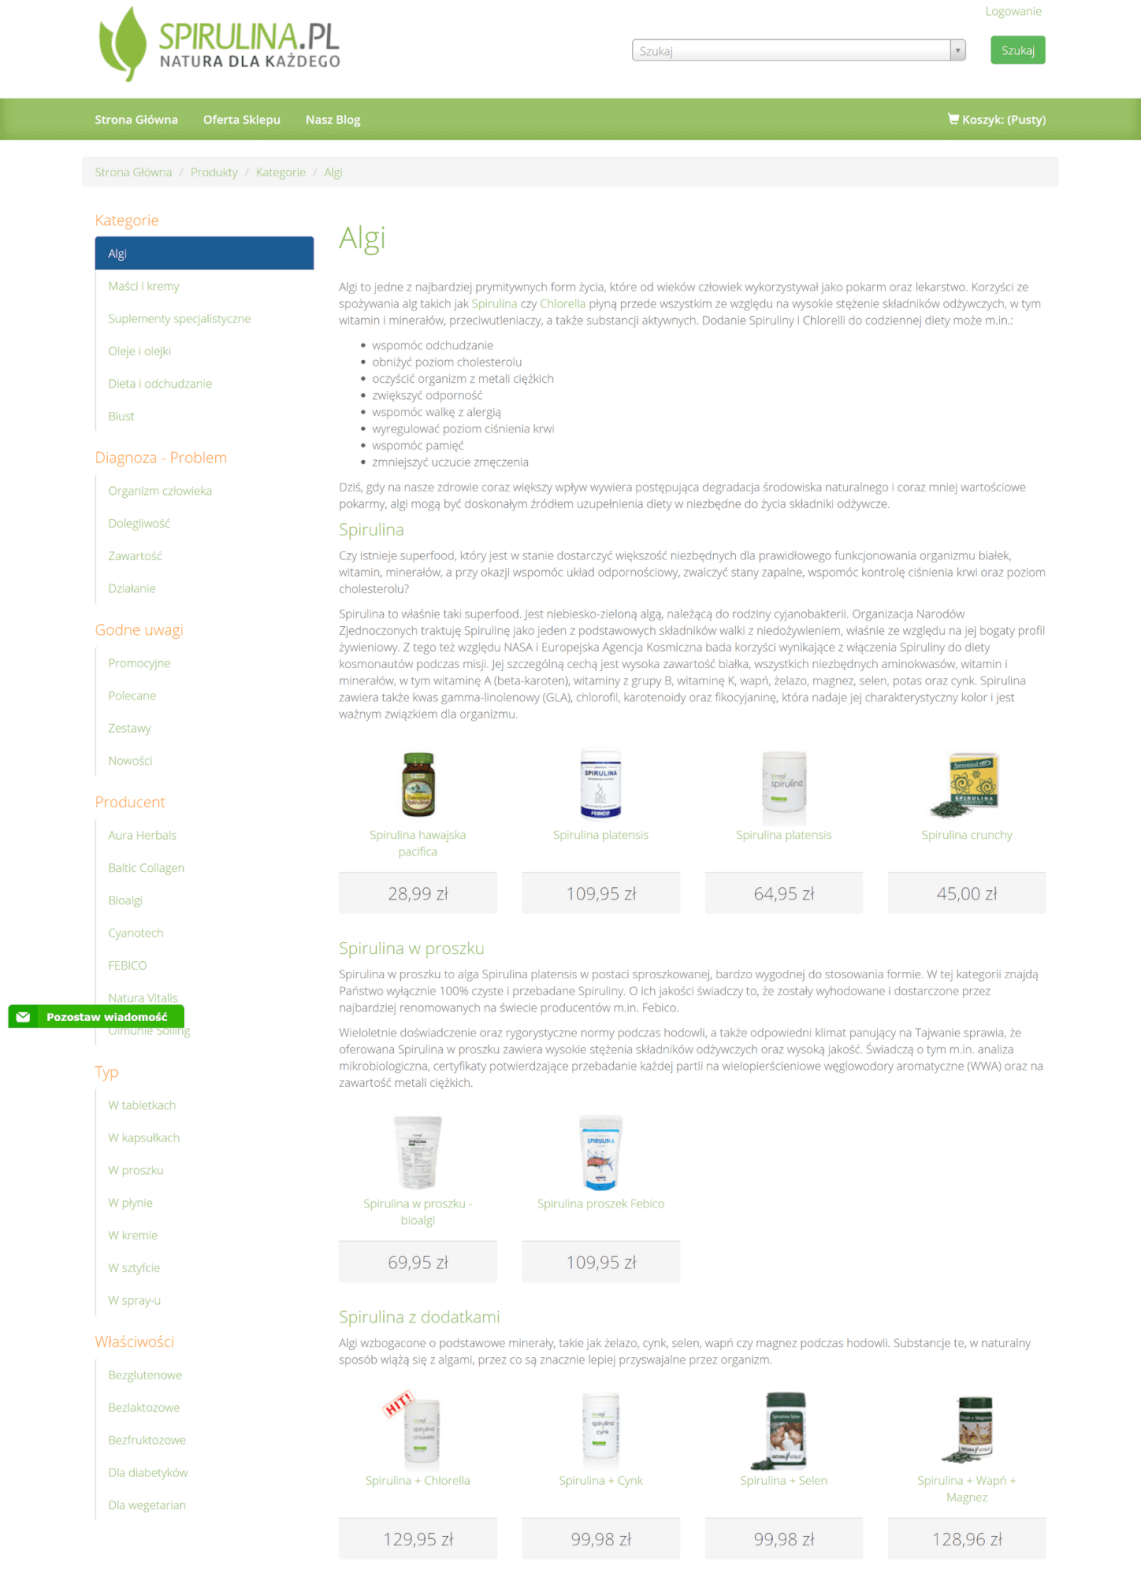 Spirulina and Spree Commerce success story